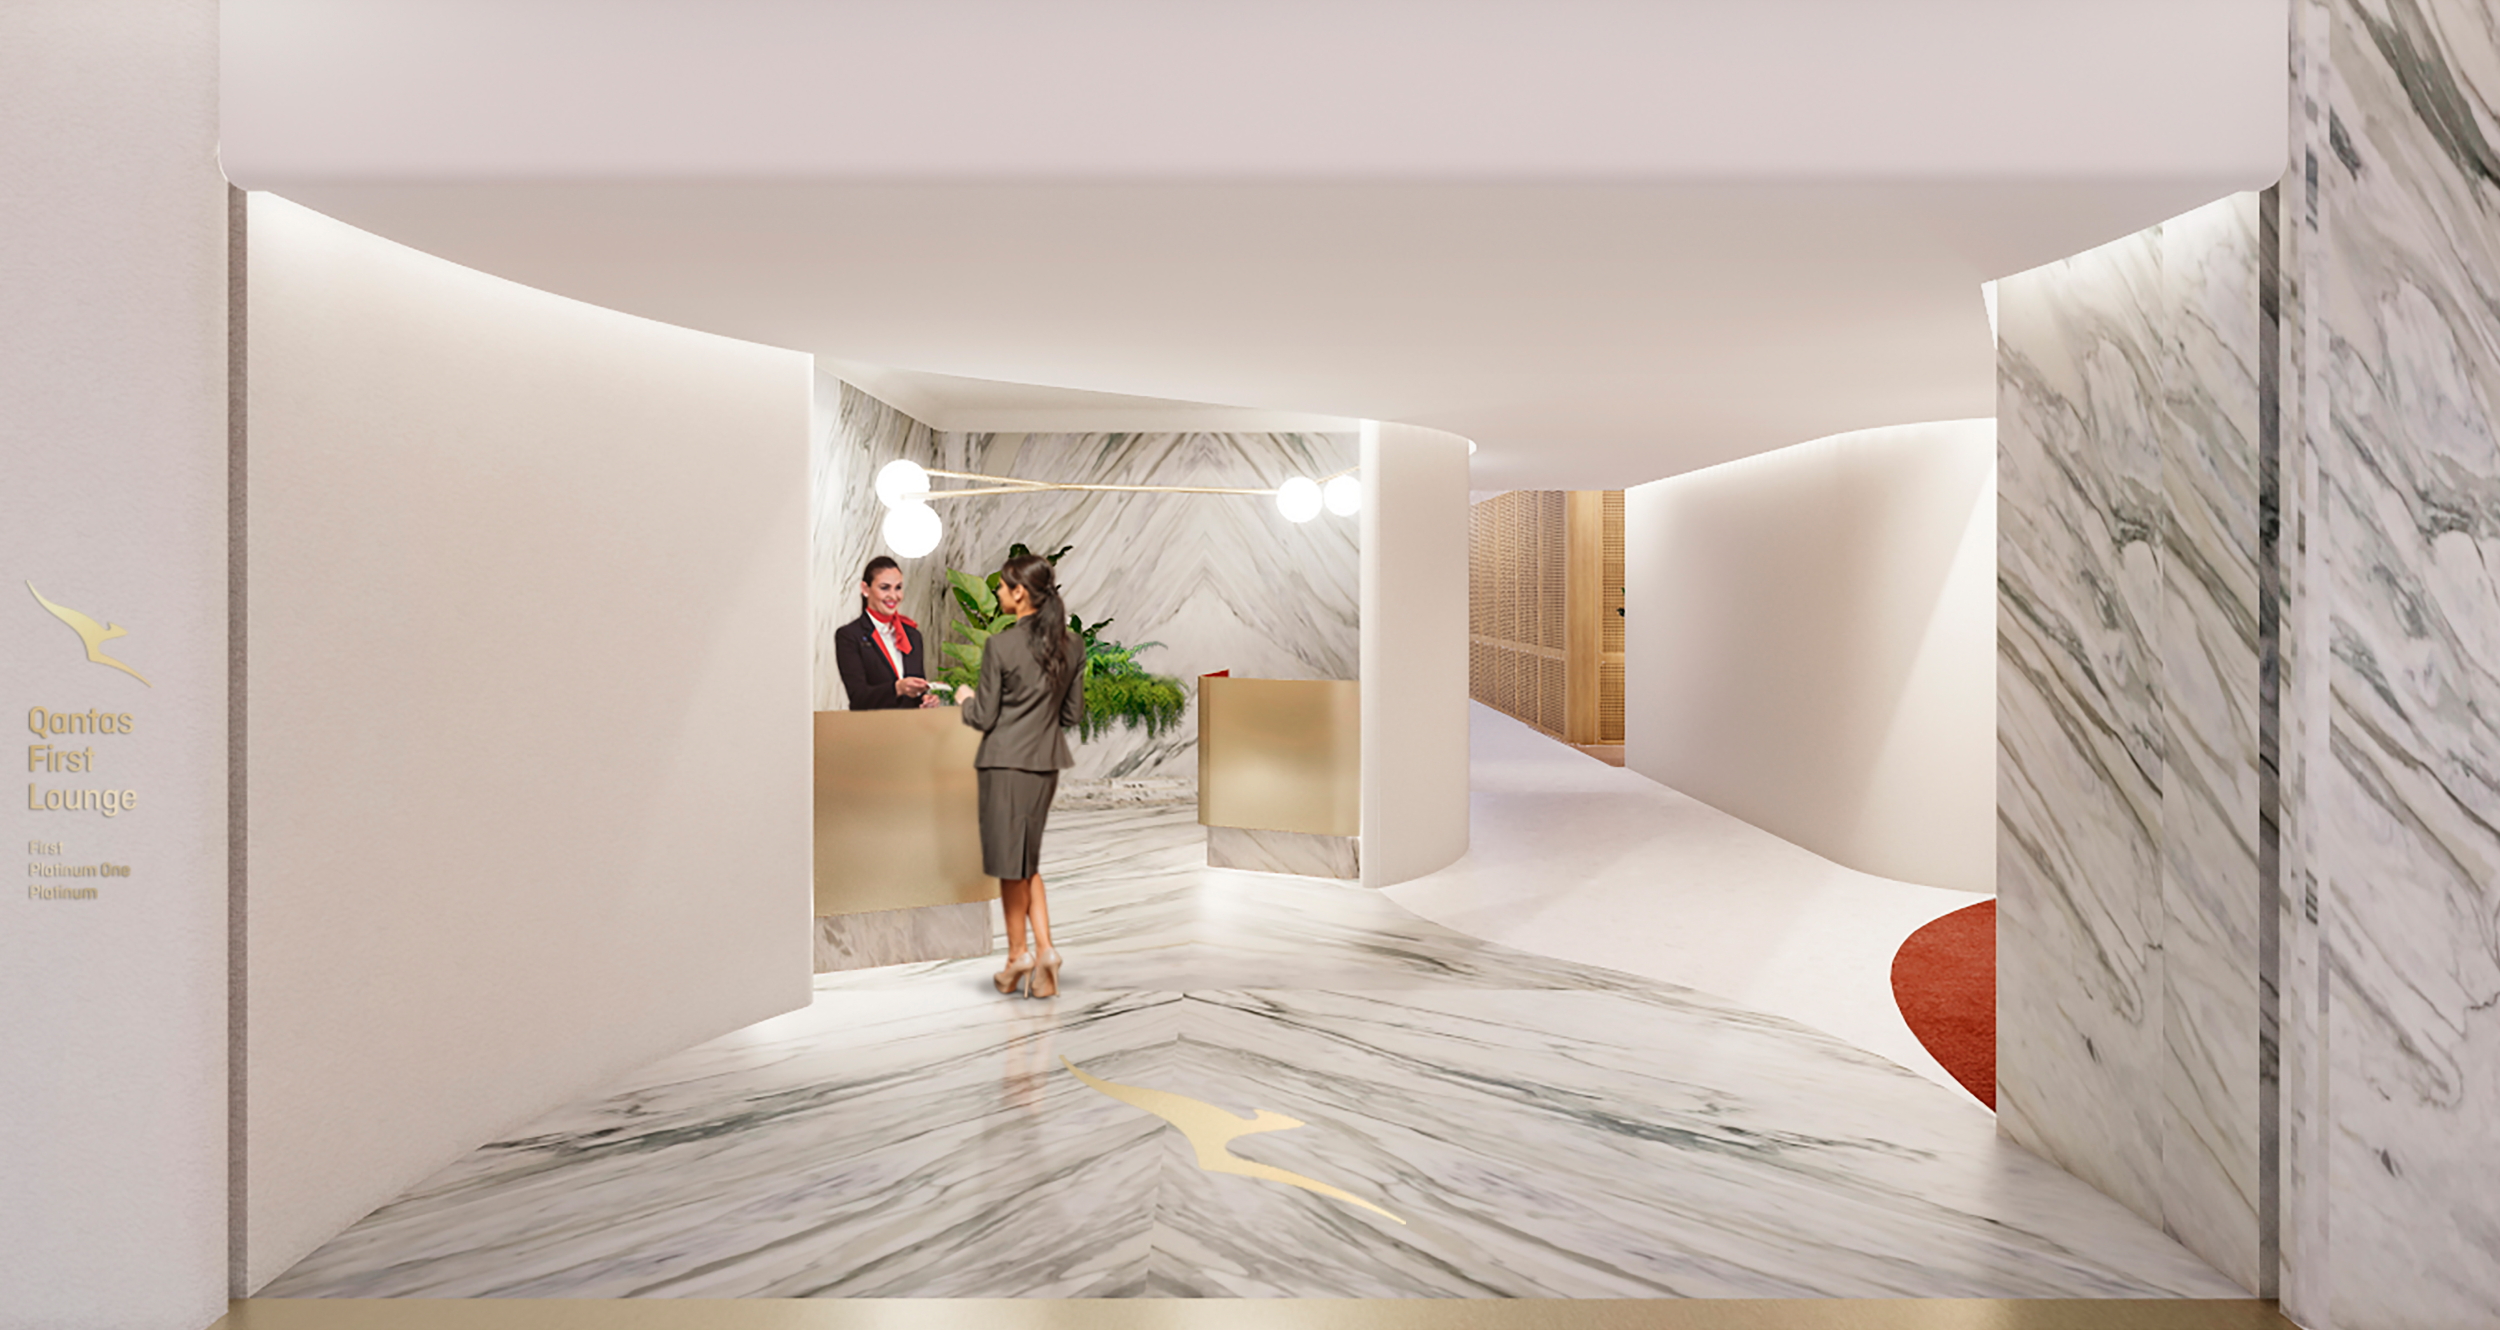 Qantas has unveiled plans to open a new First Lounge and expand its existing Business Lounge at Singapore Changi Airport. Click to enlarge.